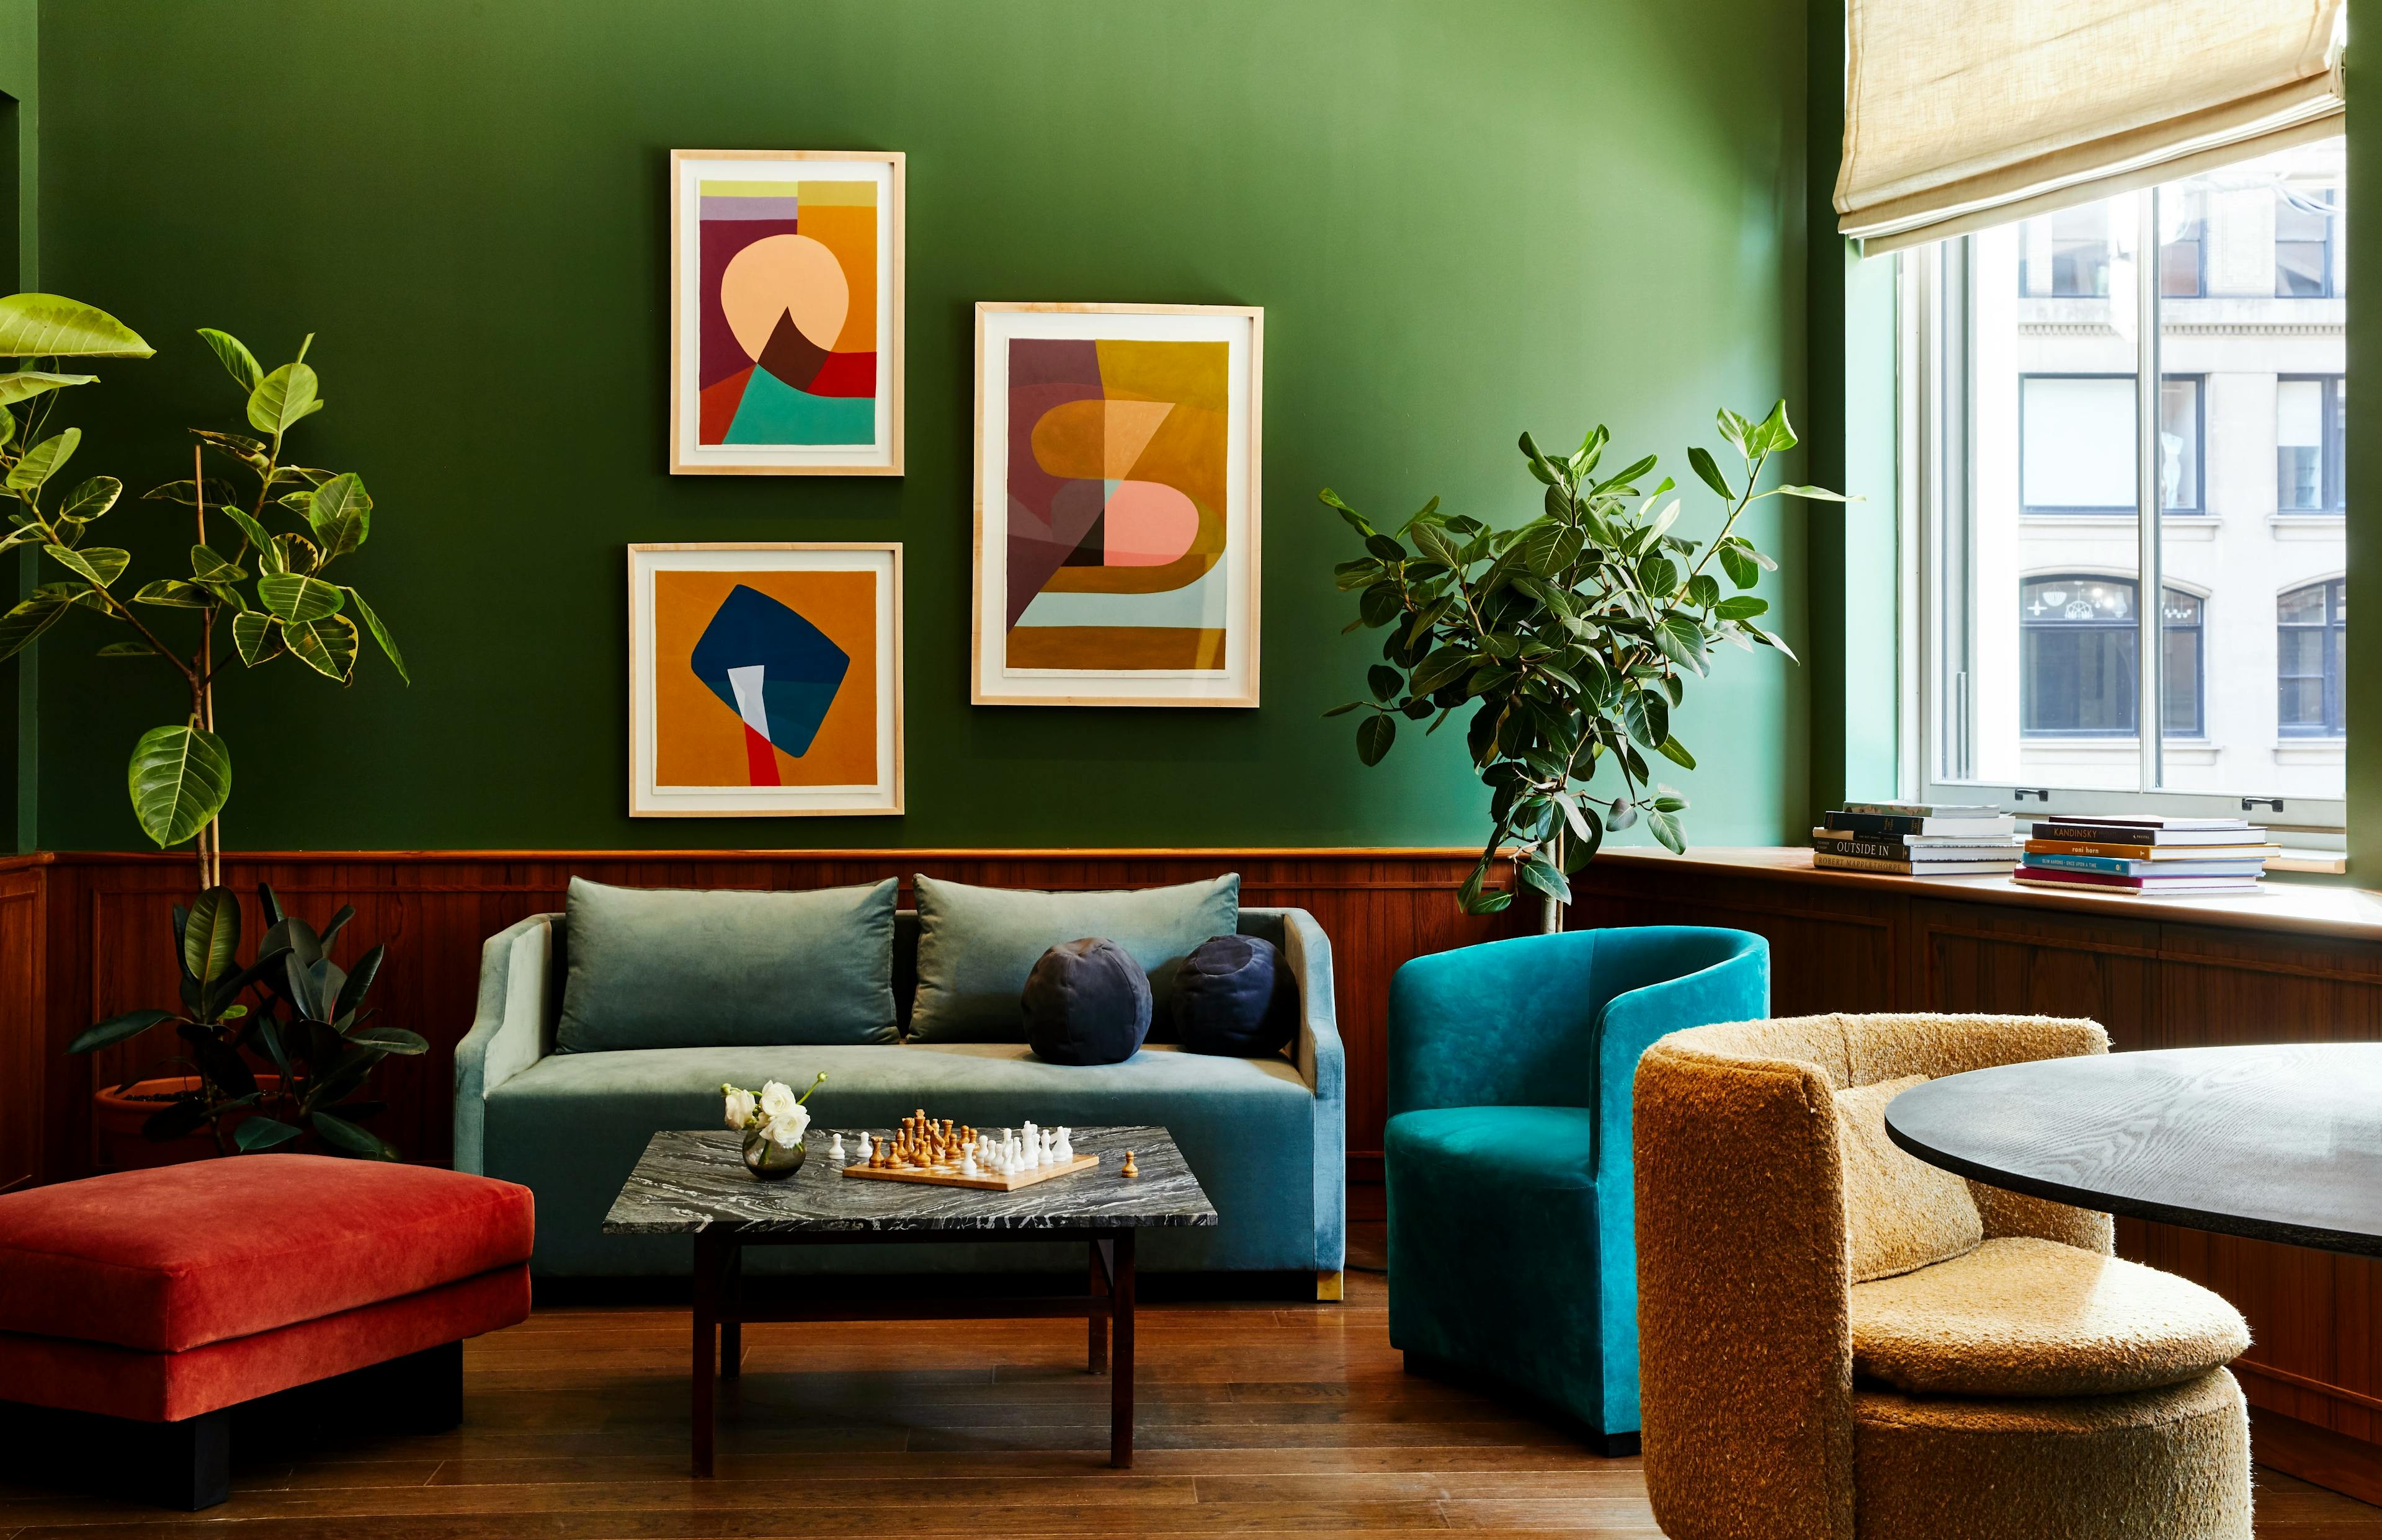 Three framed geometric paintings by Kristin Texeira on a dark green wall in a lounge area with a sofa and armchairs at the Chief Flatiron clubhouse.